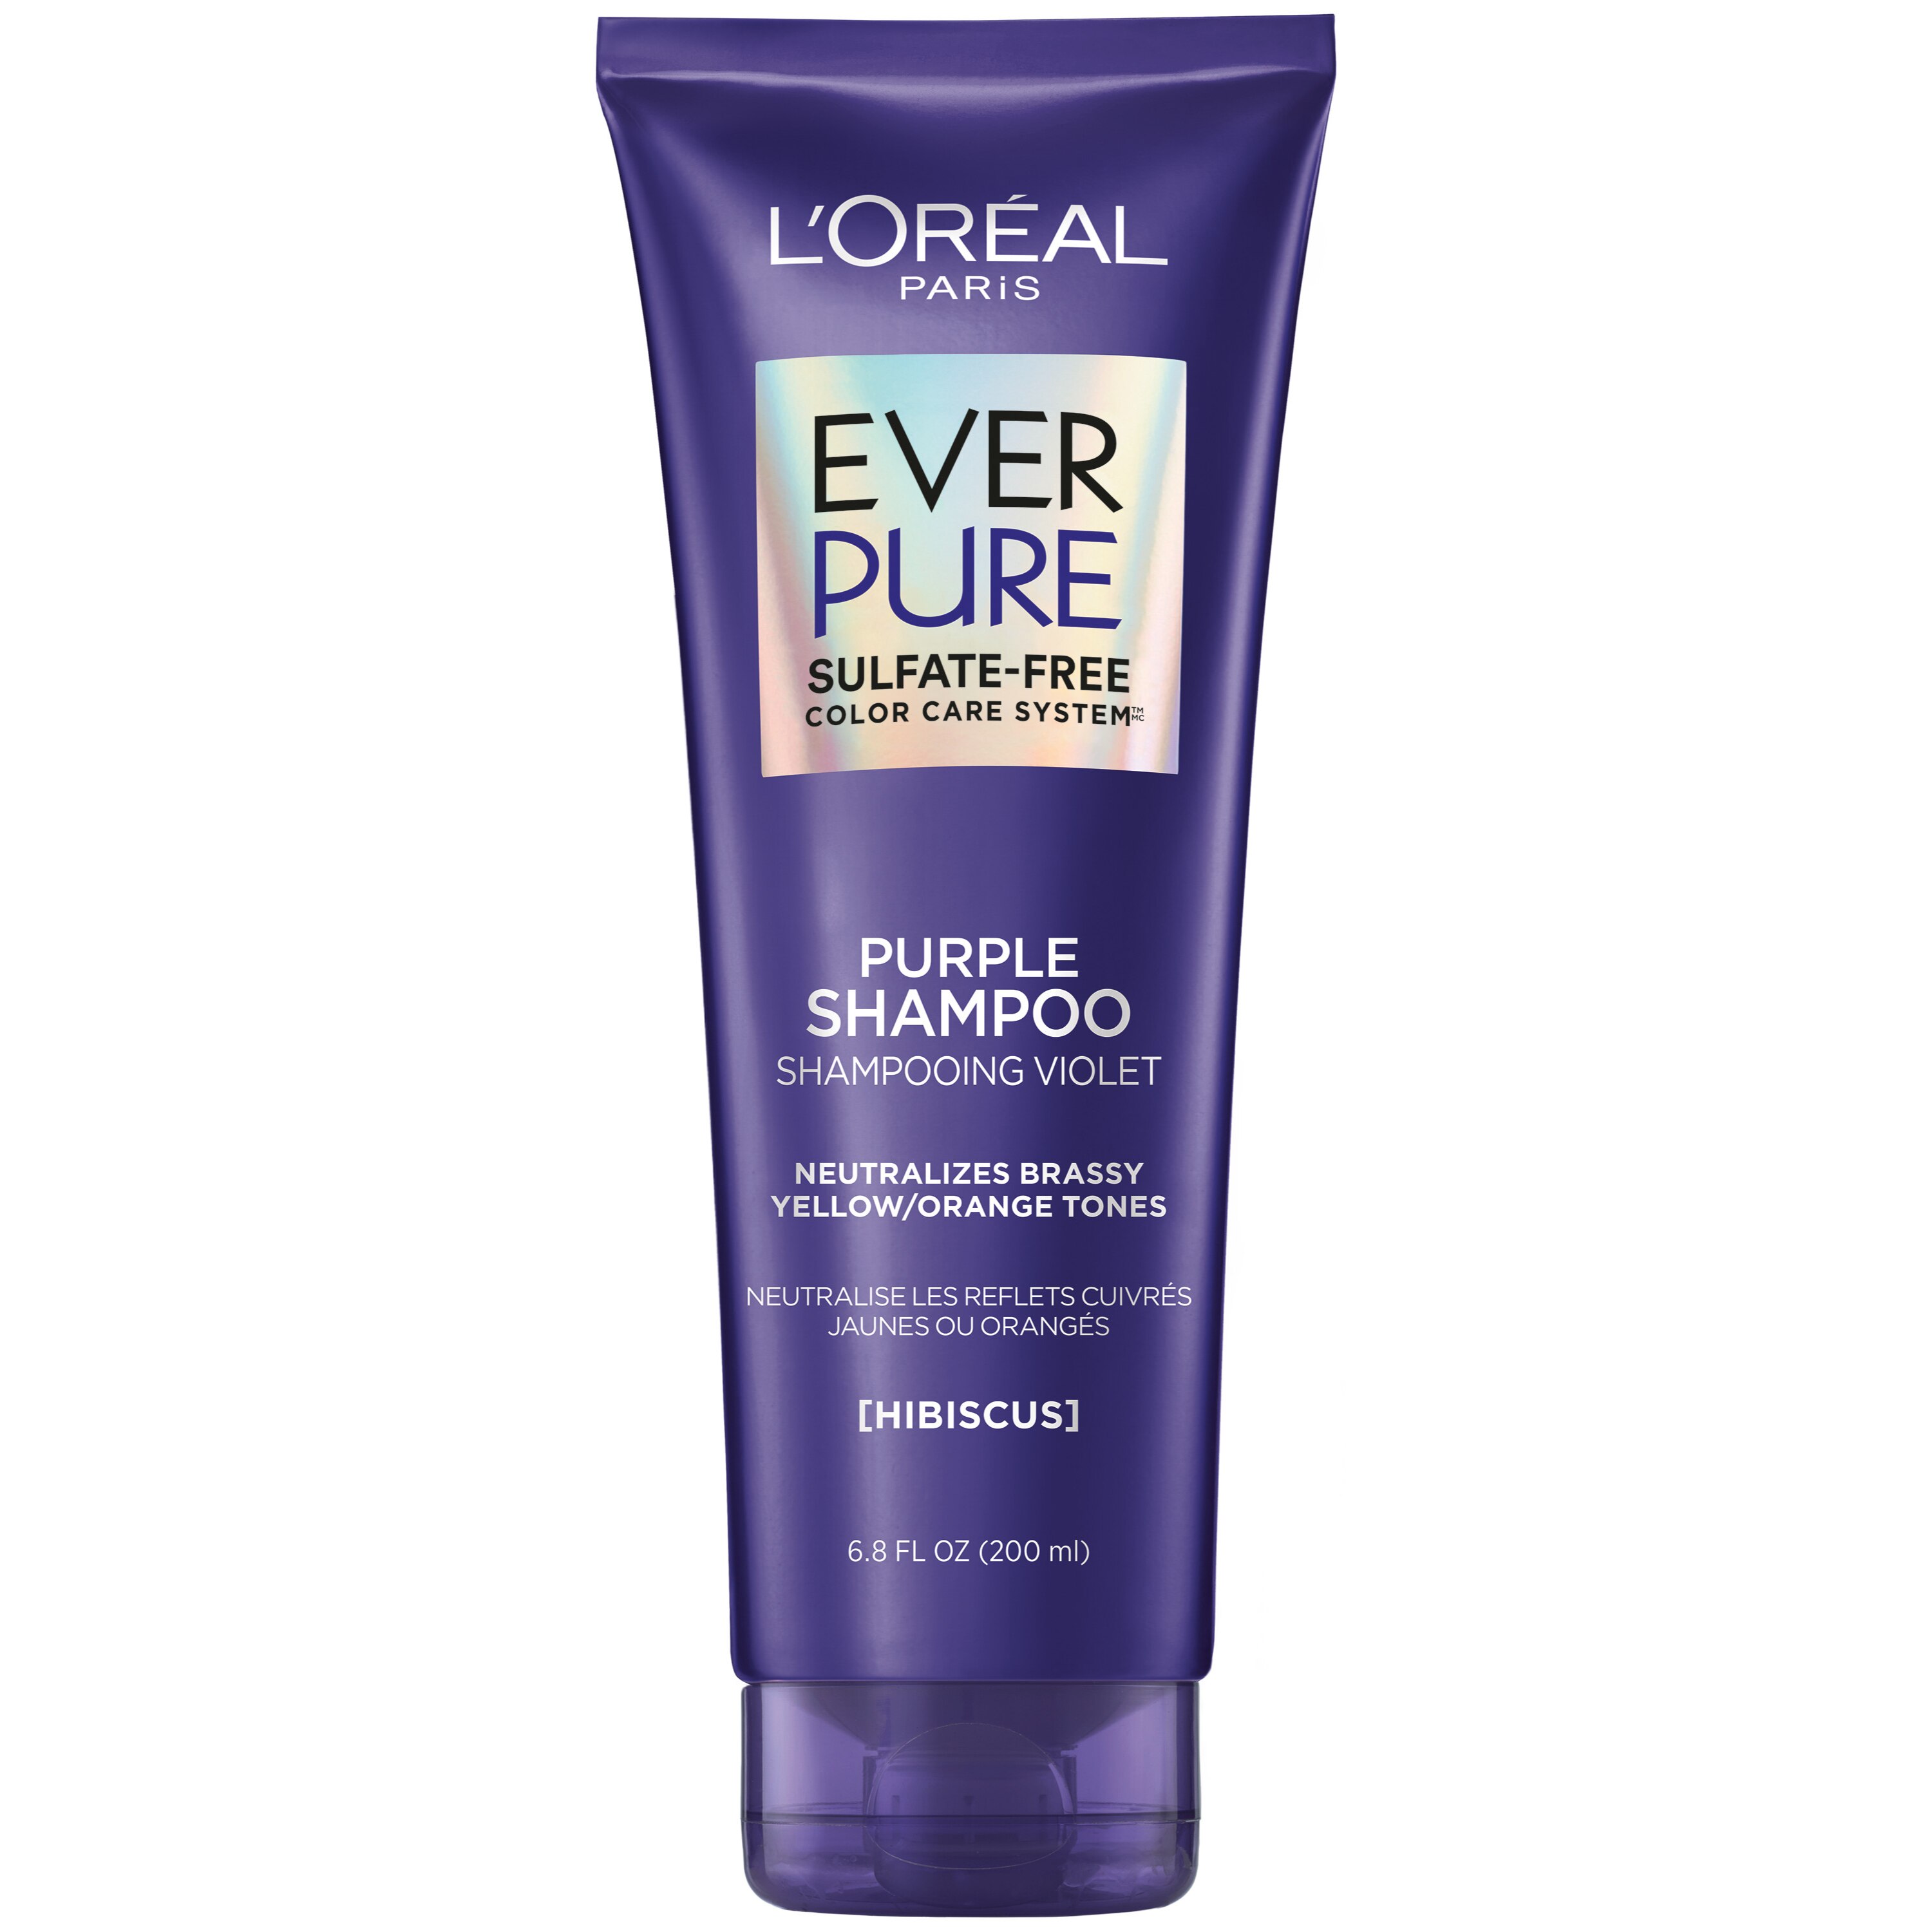 banjo bassin slap af L'Oreal Paris EverPure Sulfate Free Purple Shampoo | Pick Up In Store TODAY  at CVS